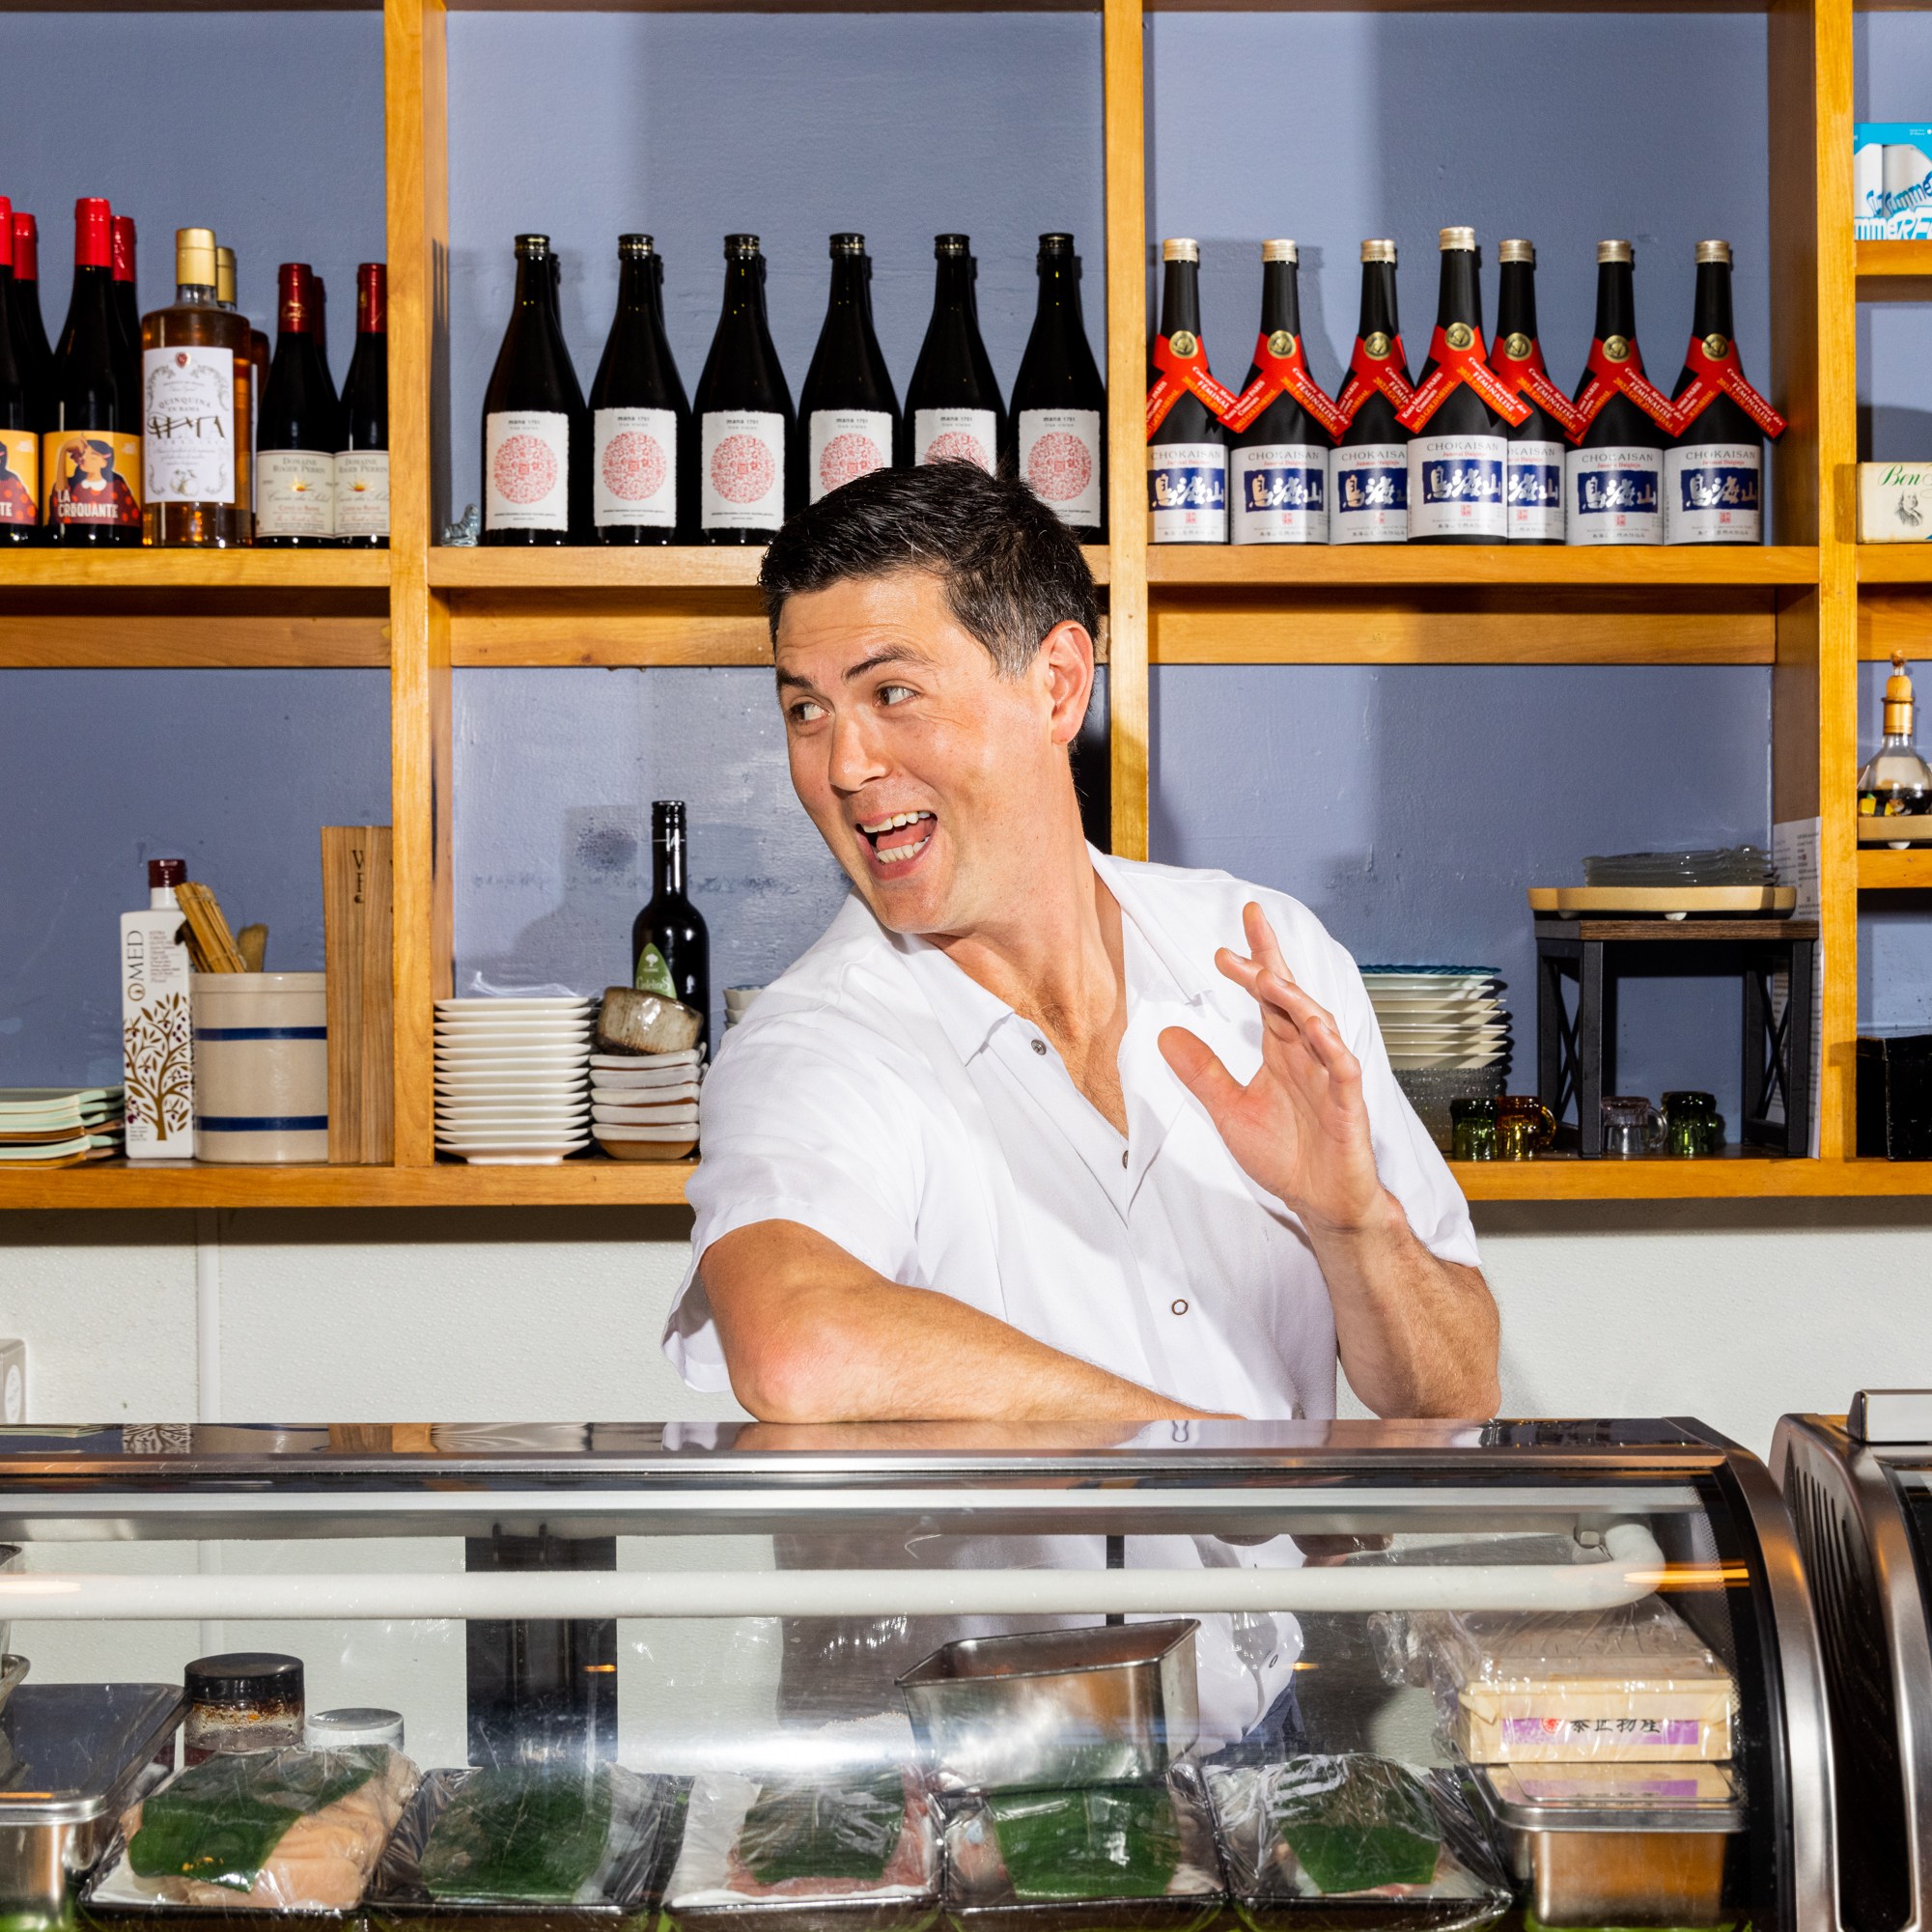 A man in a white shirt stands behind a counter in front of shelves stocked with bottles and dishes, smiling and gesturing with his right hand raised.